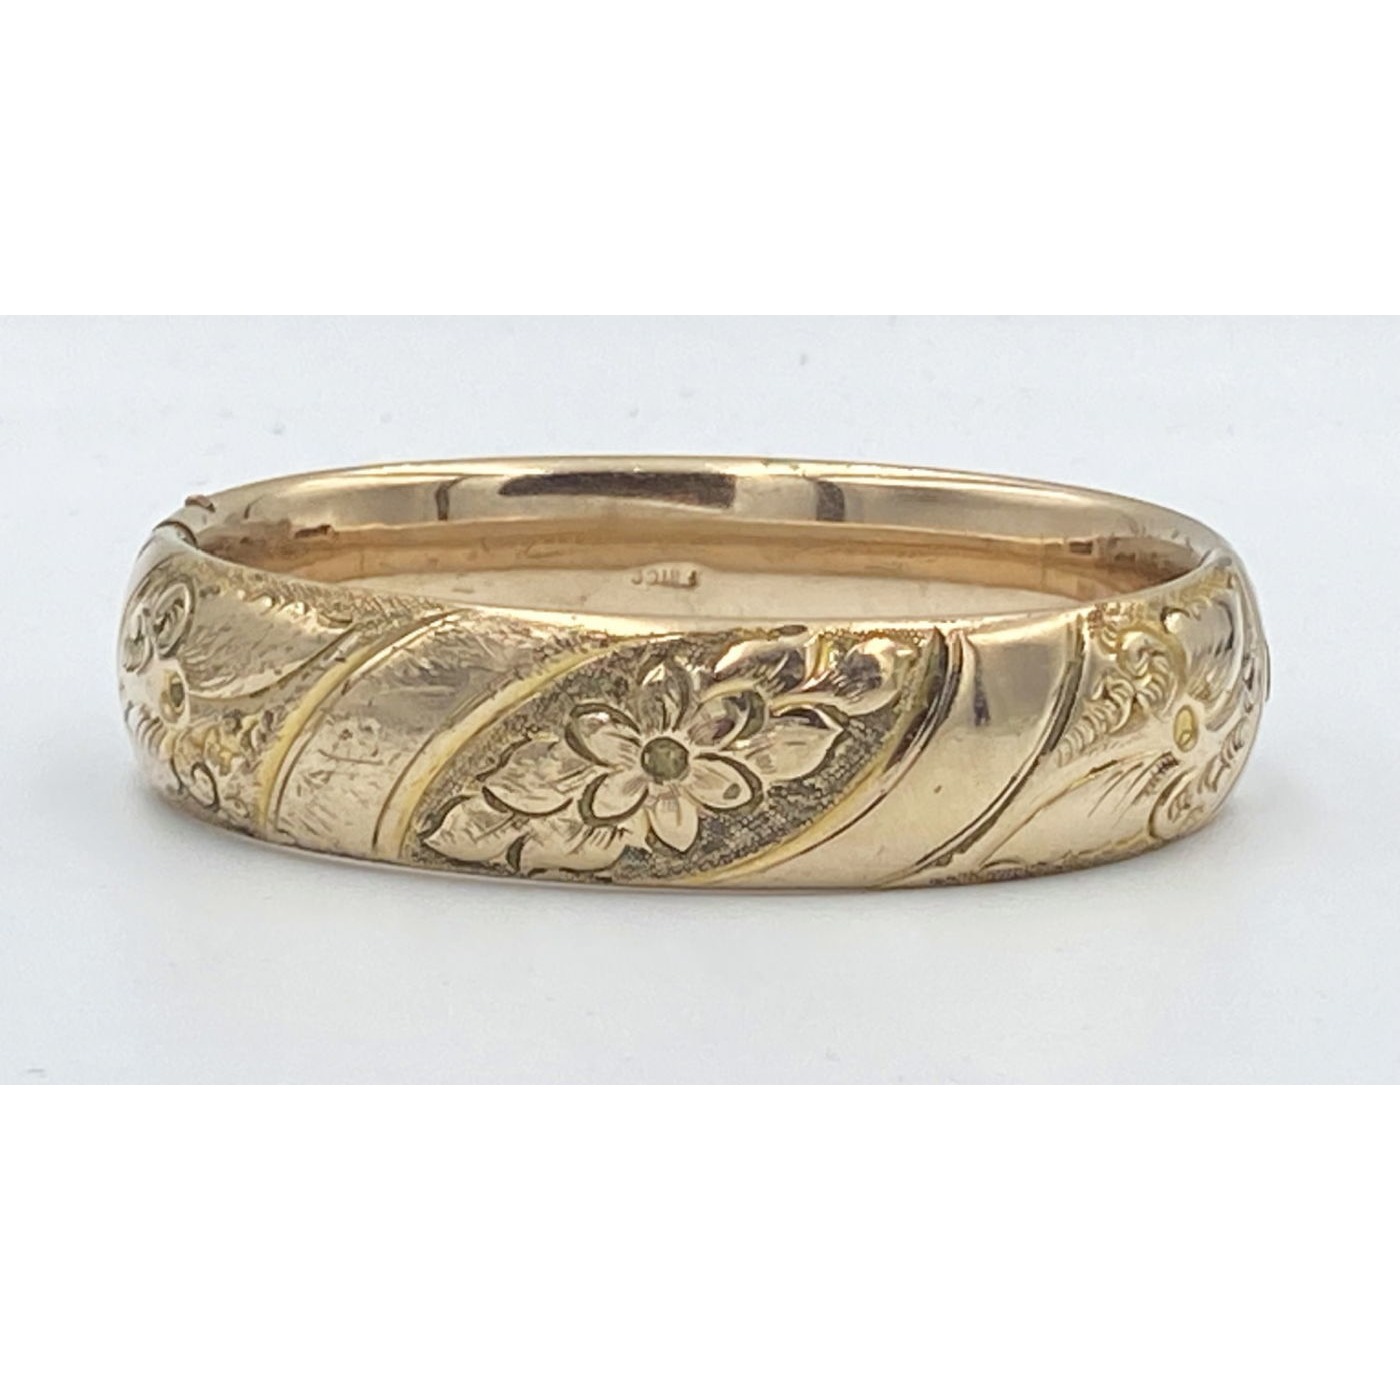 Unusually SMALL Wide Bangle w/ Deep Engraving